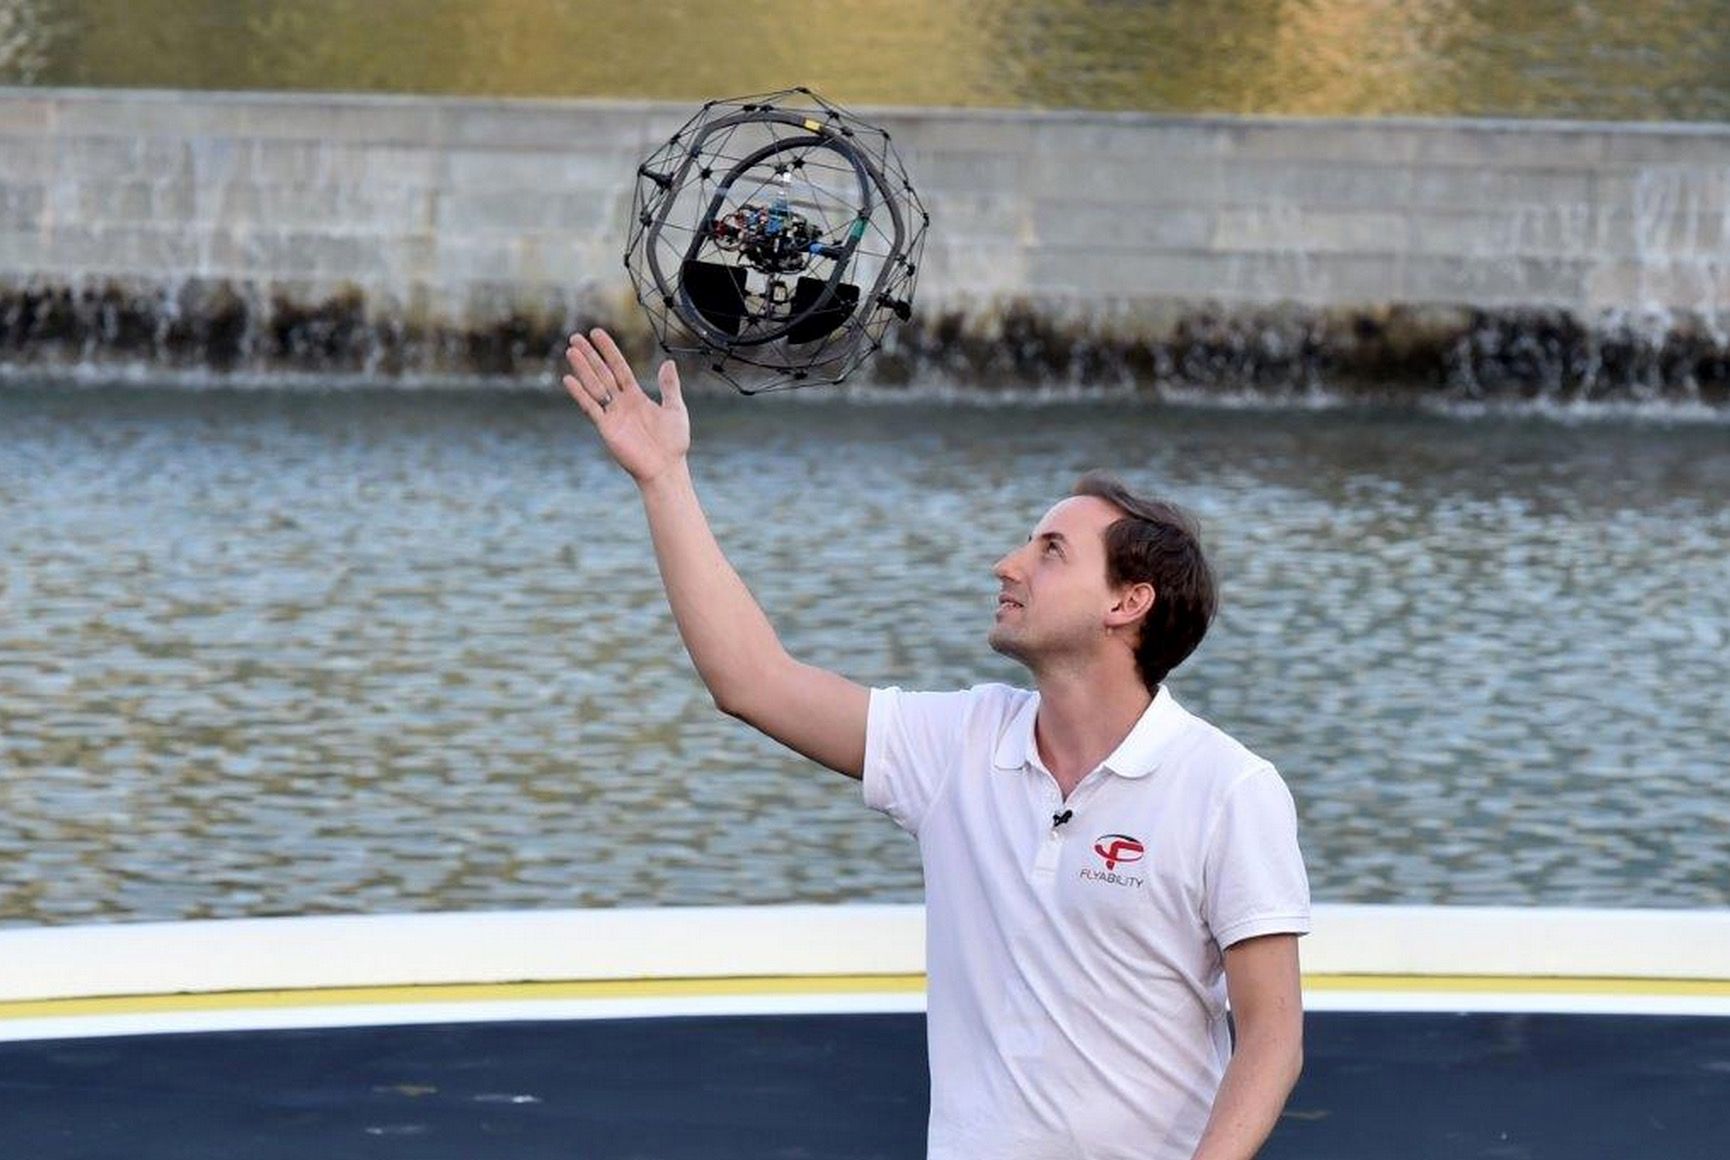 drones for good winner revealed gimball is a crash proof drone perfect for search and rescue image 1